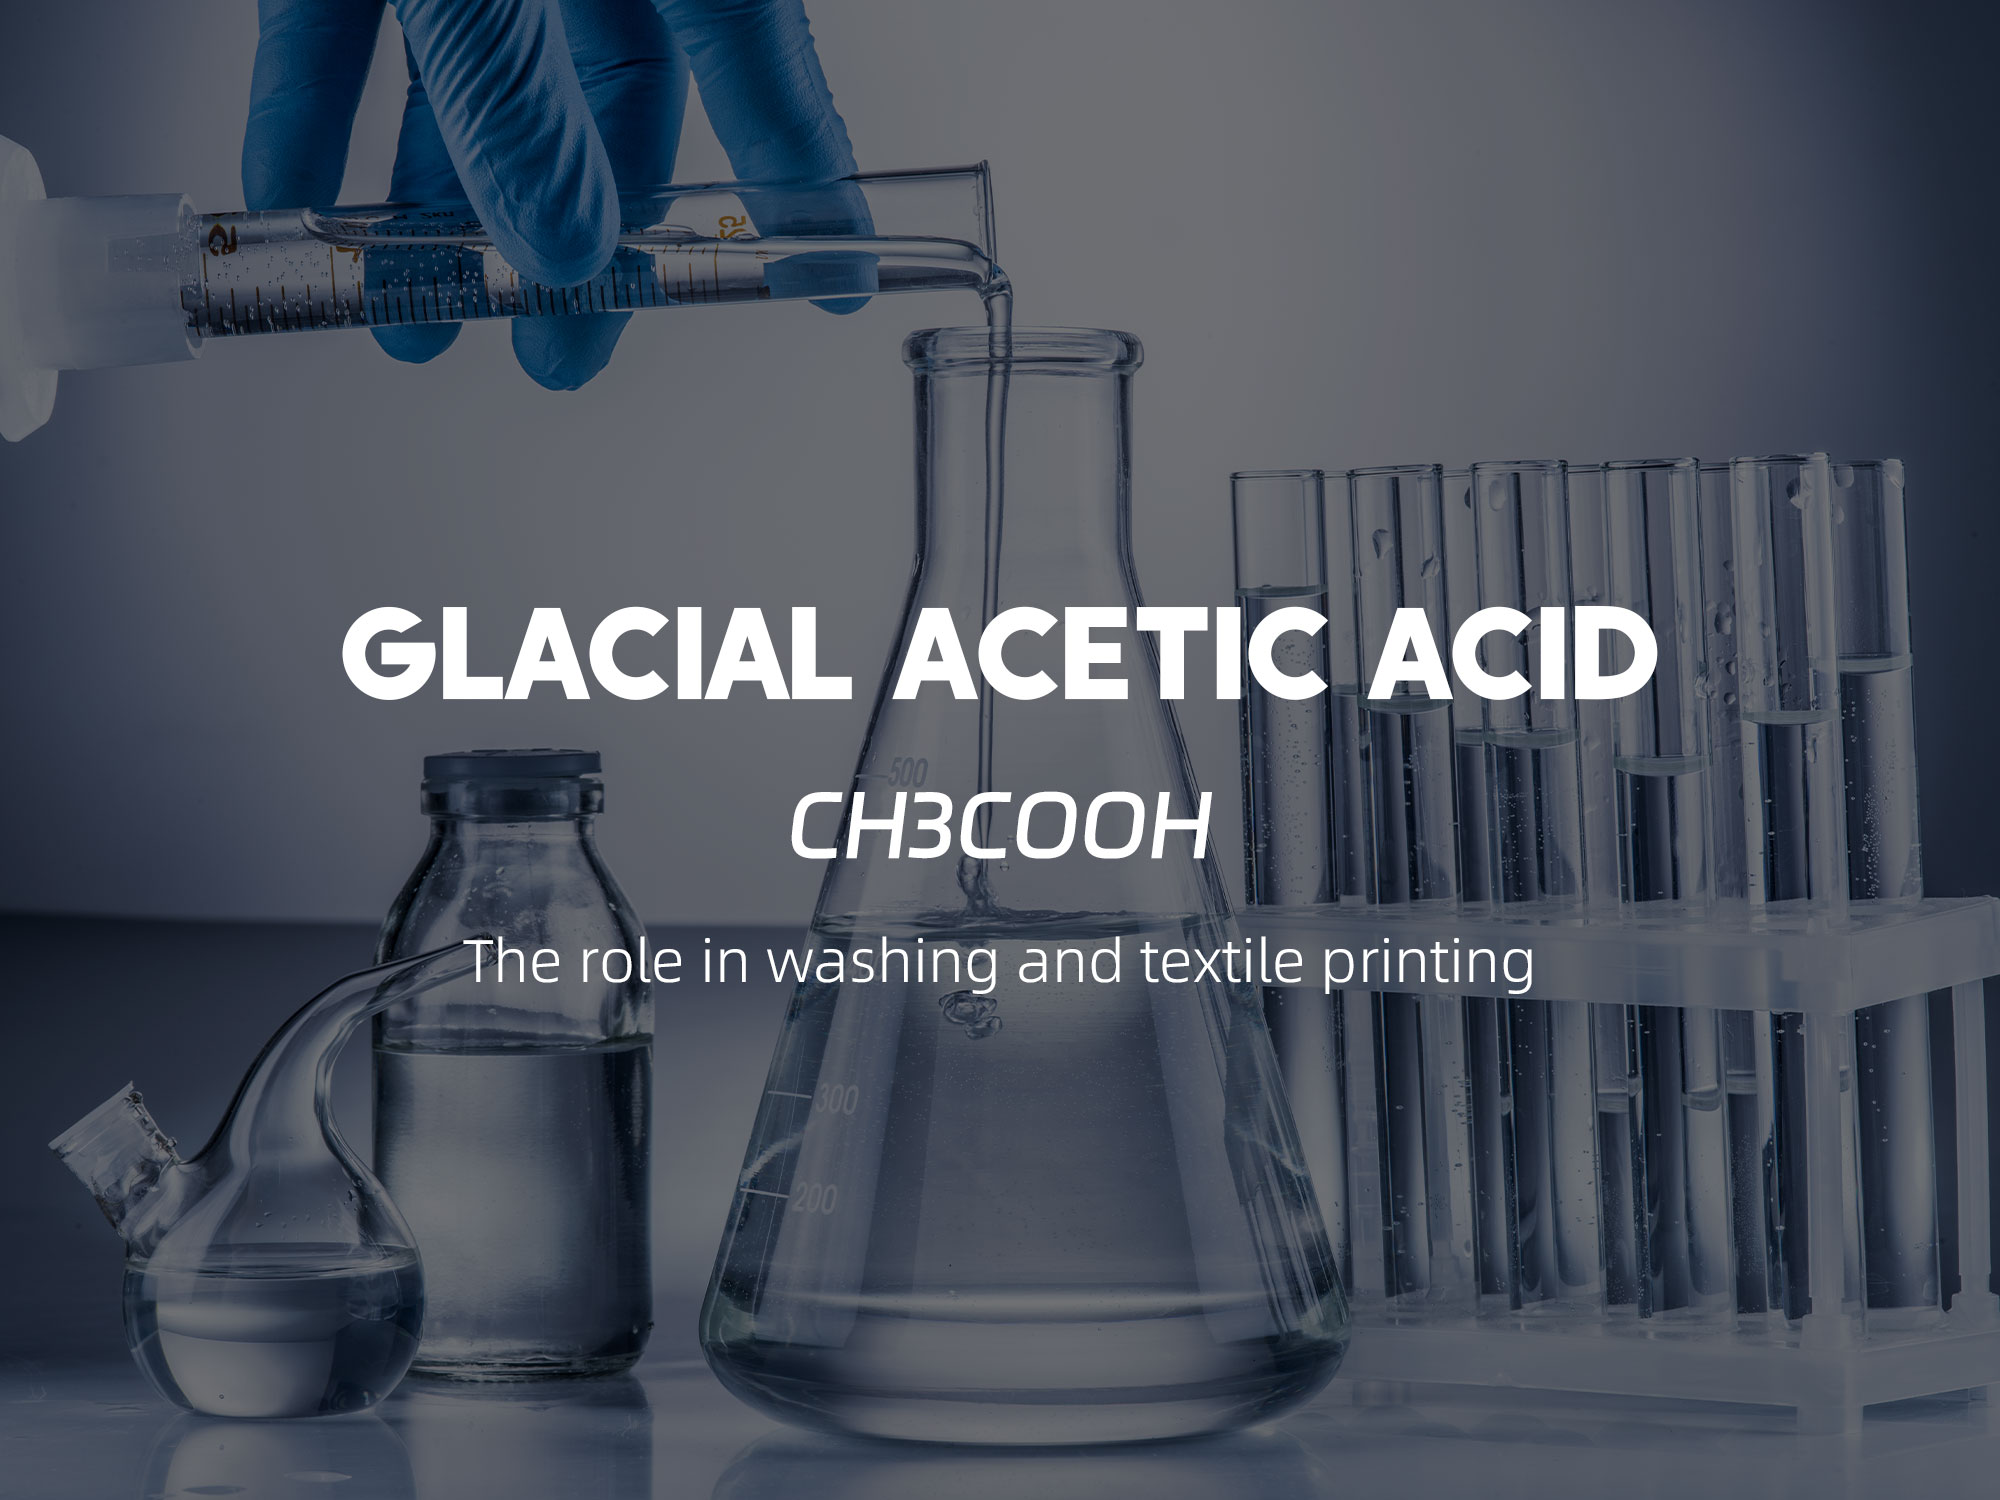 The role of glacial acetic acid in washing and textile dyeing